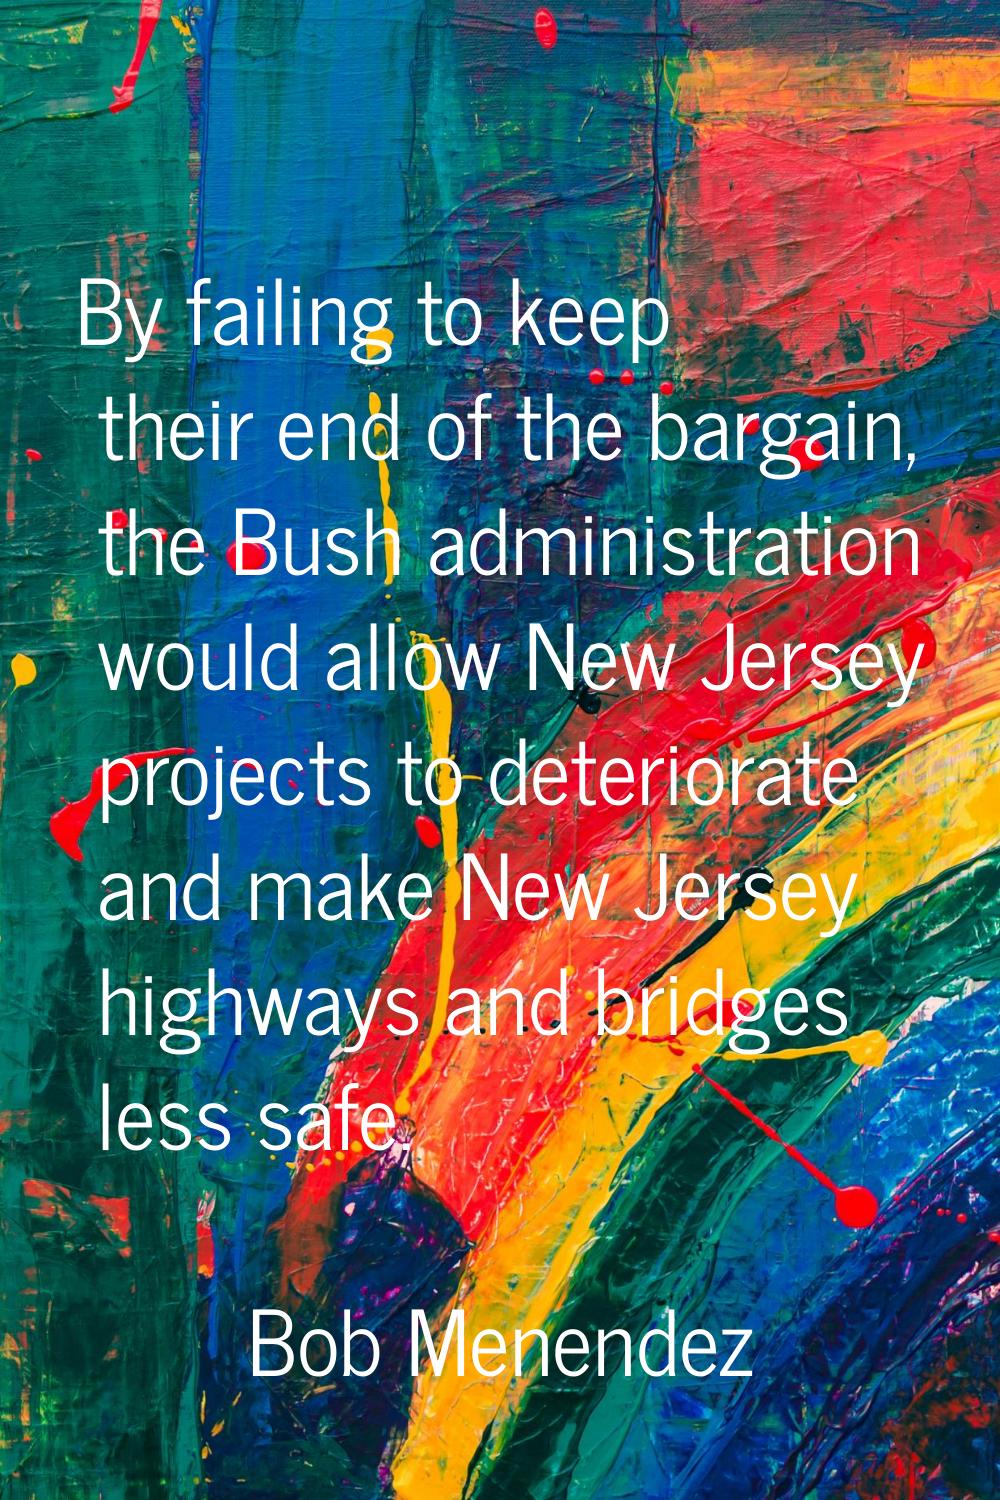 By failing to keep their end of the bargain, the Bush administration would allow New Jersey project